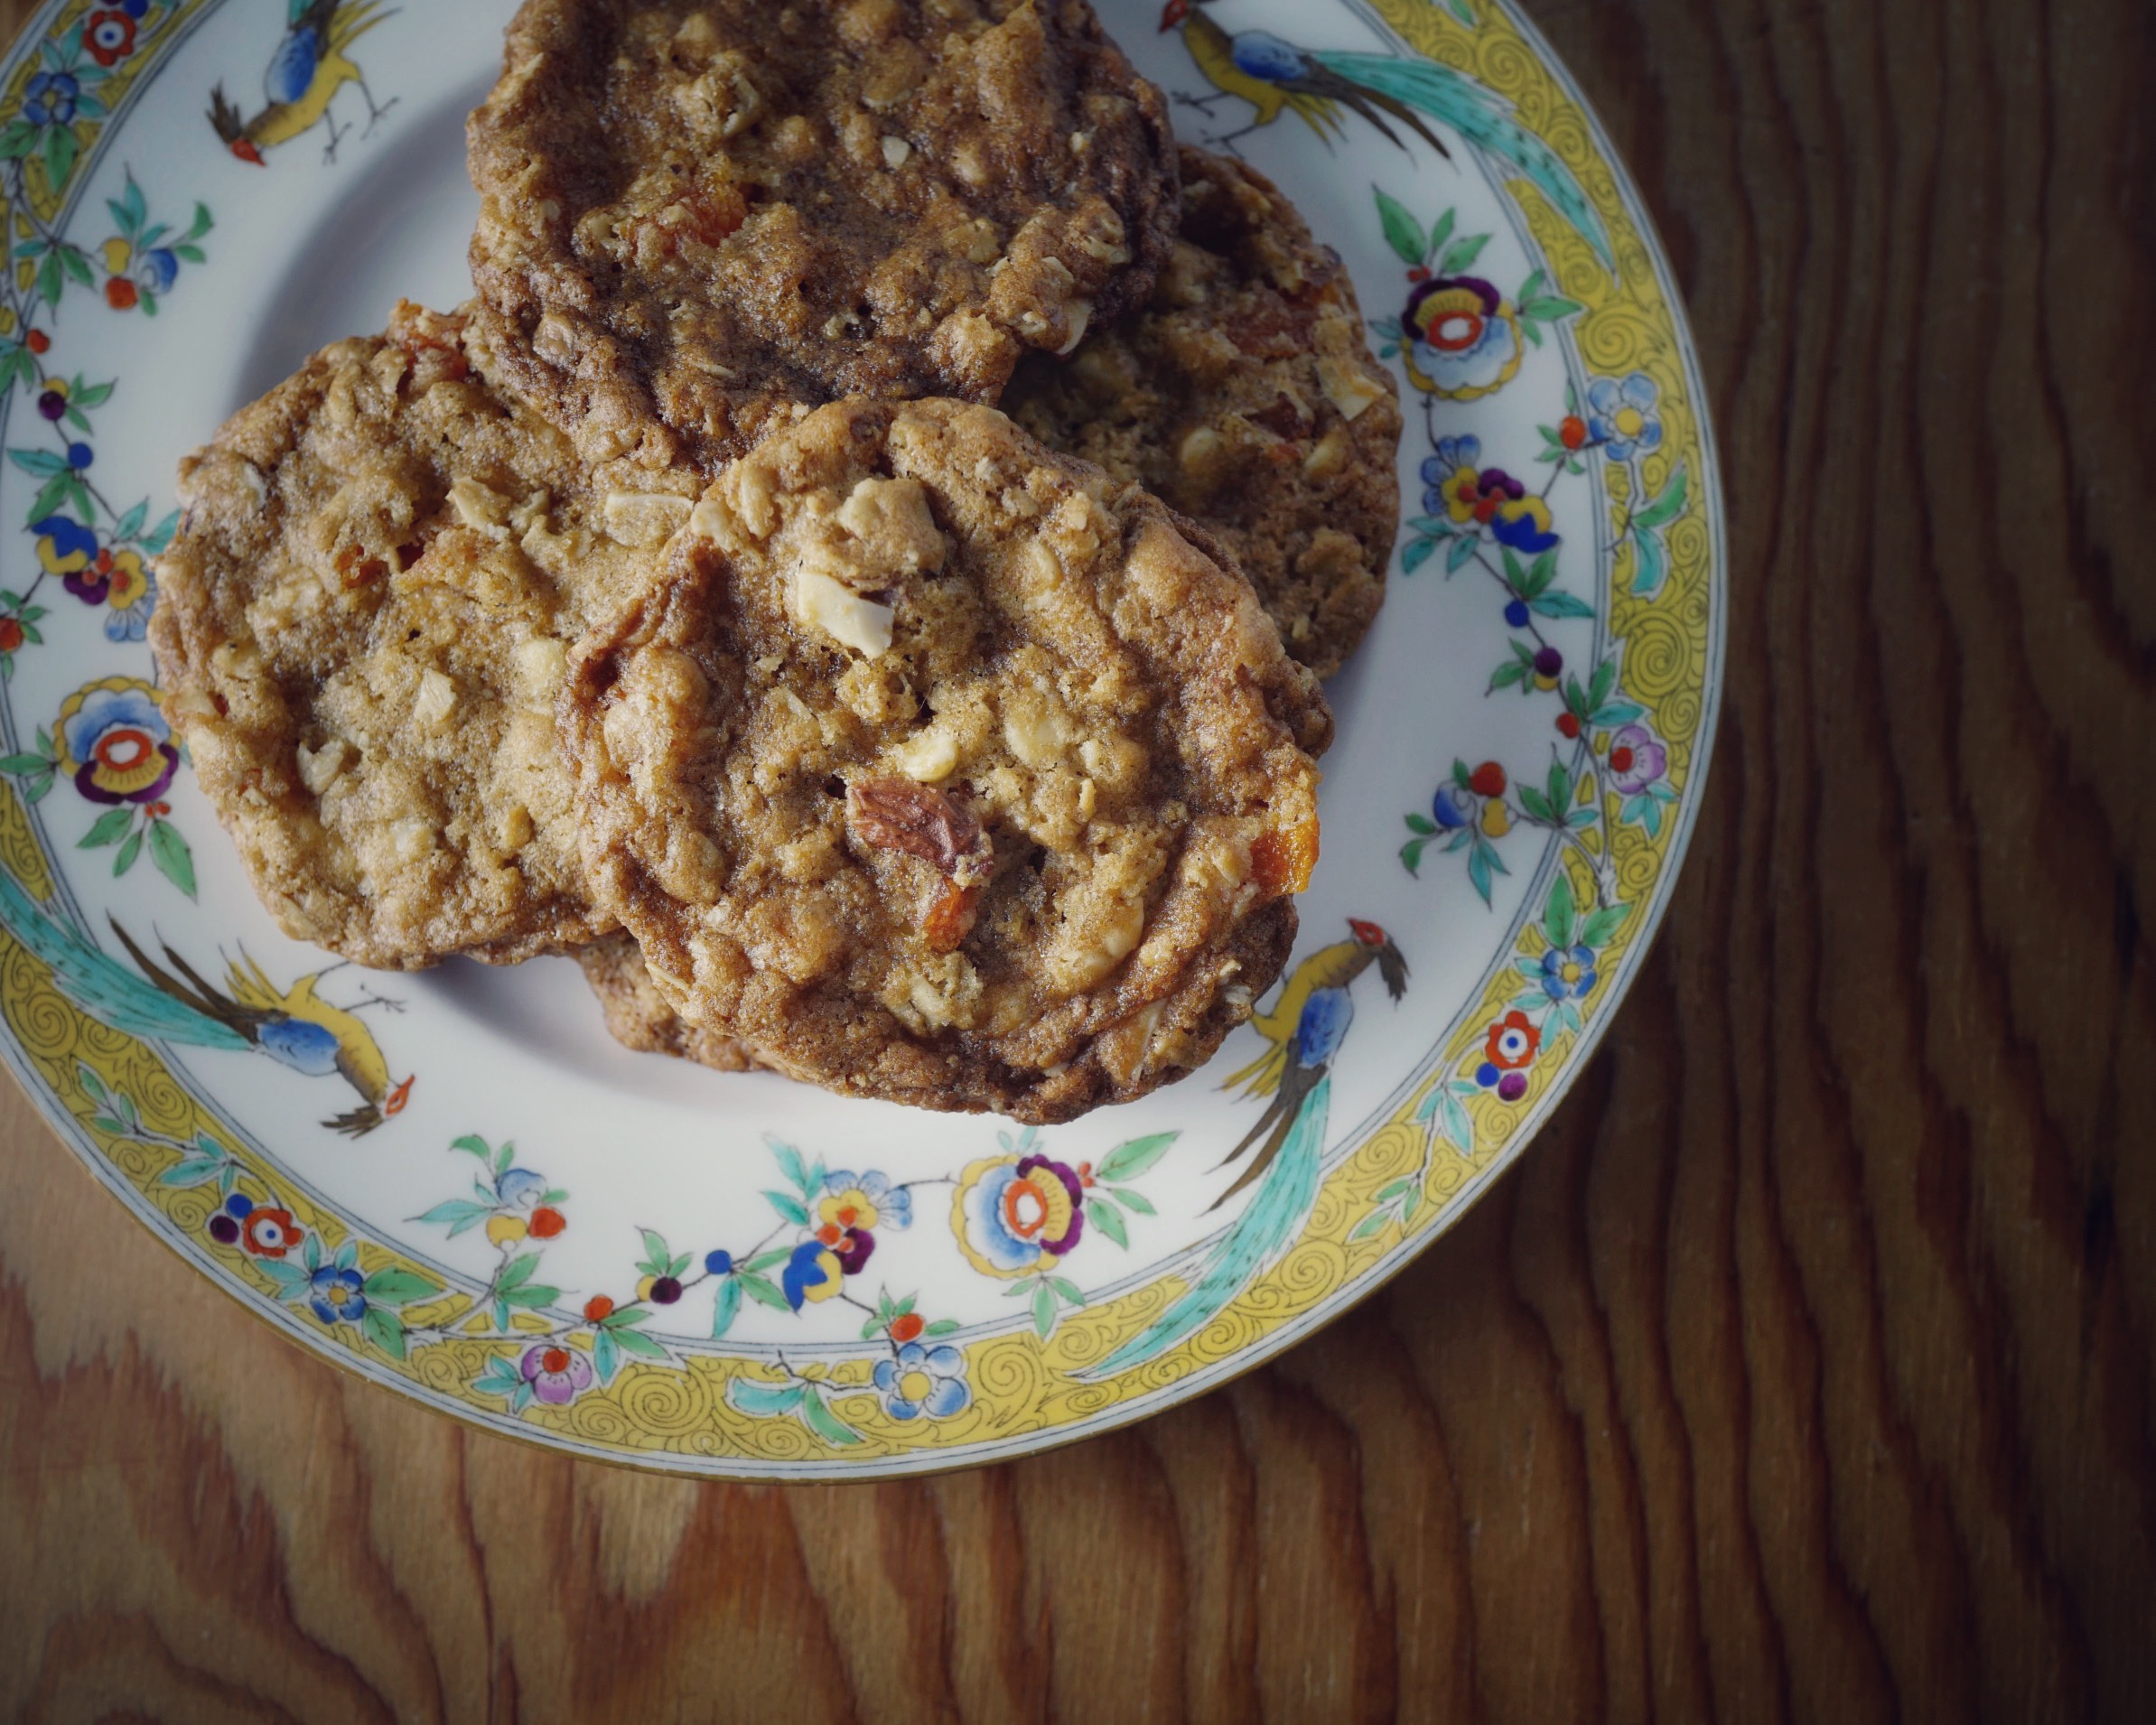 Cardamom apricot oatmeal cookies delightfully dispose of white
chocolate